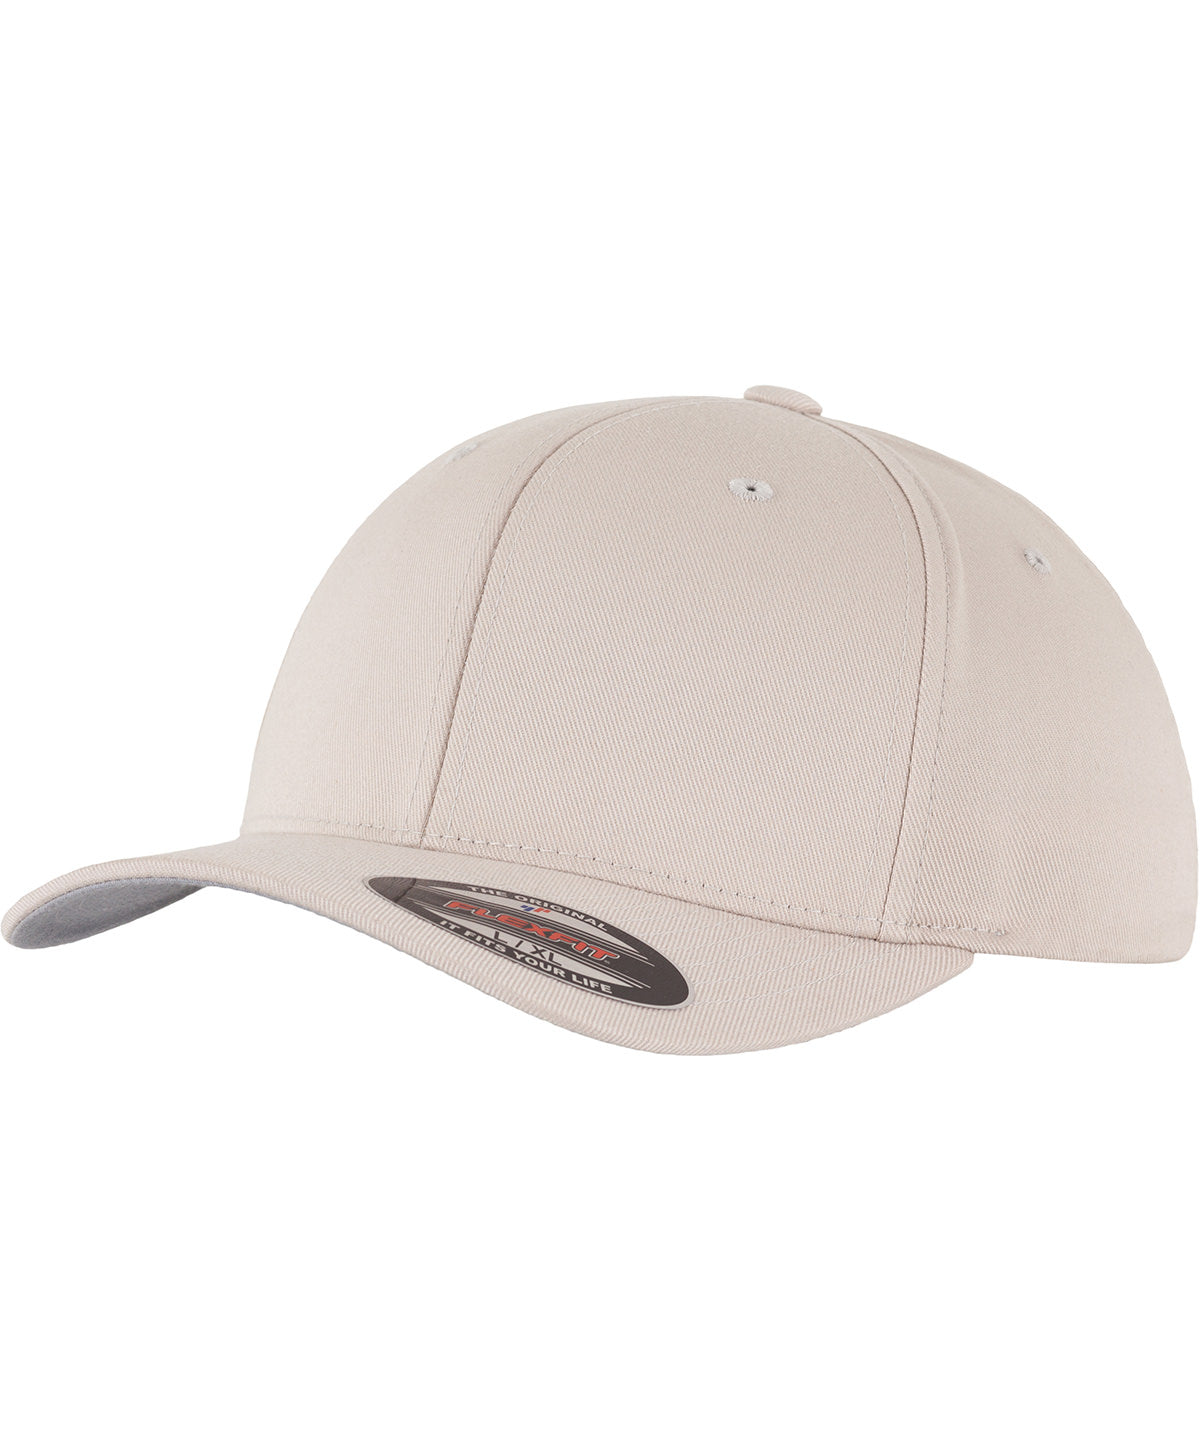 Stone - Flexfit fitted baseball cap (6277) Caps Flexfit by Yupoong 2022 Spring Edit, Headwear, Must Haves, New Colours for 2023, Rebrandable, Summer Accessories Schoolwear Centres